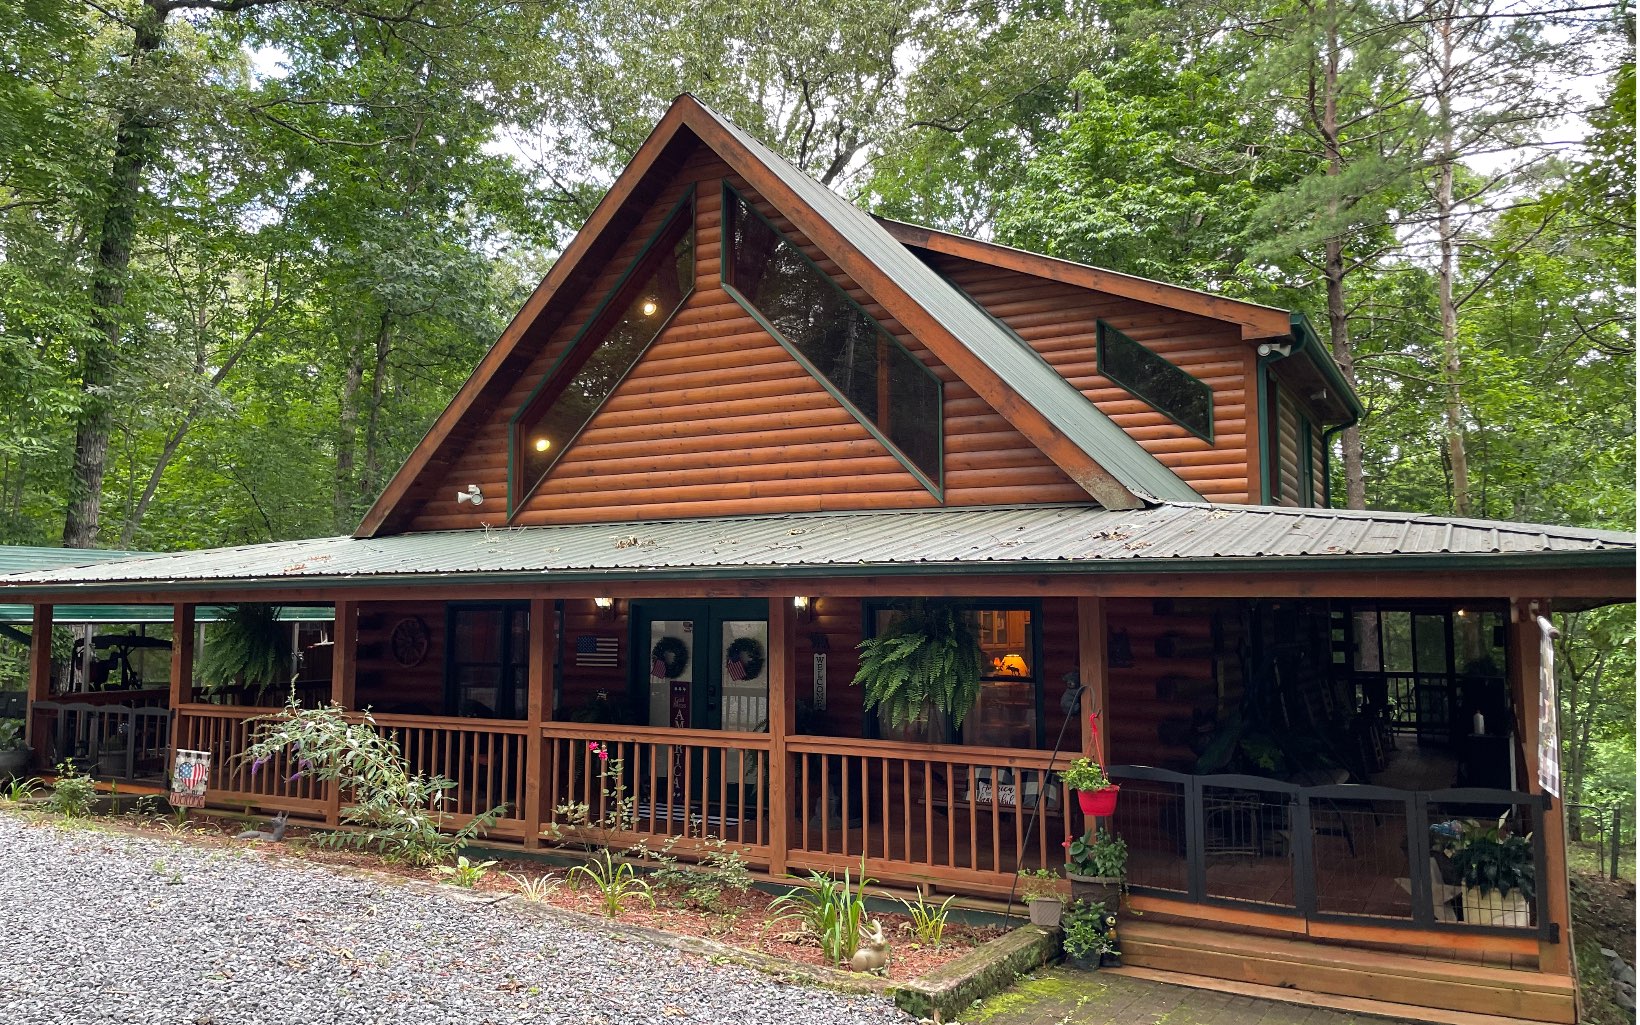 This cabin has awesome short-term rental potential. It also has access to Fightingtown Creek with its premiere trout fishing location in North Georgia -it has it all. It has newer stainless appliances in a massive kitchen, fiber optic super high speed internet, newer HVAC system, and beautiful wrap around porch with hot tub. The newly built fire pit area has plenty of space for entertaining and a fenced in backyard for your pets. The trout shack is perfect for any fly fisherman and has electricity connected. There is even an extra storage shed. This cabin provides a safe room with hidden access. The close proximity between historic downtown Blue Ridge and McCaysville offers an easy reach for shopping yet still secluded and tucked away in the woods. Other outdoor adventures close by include Lake Blue Ridge, Toccoa River, unlimited hiking, biking and fishing.